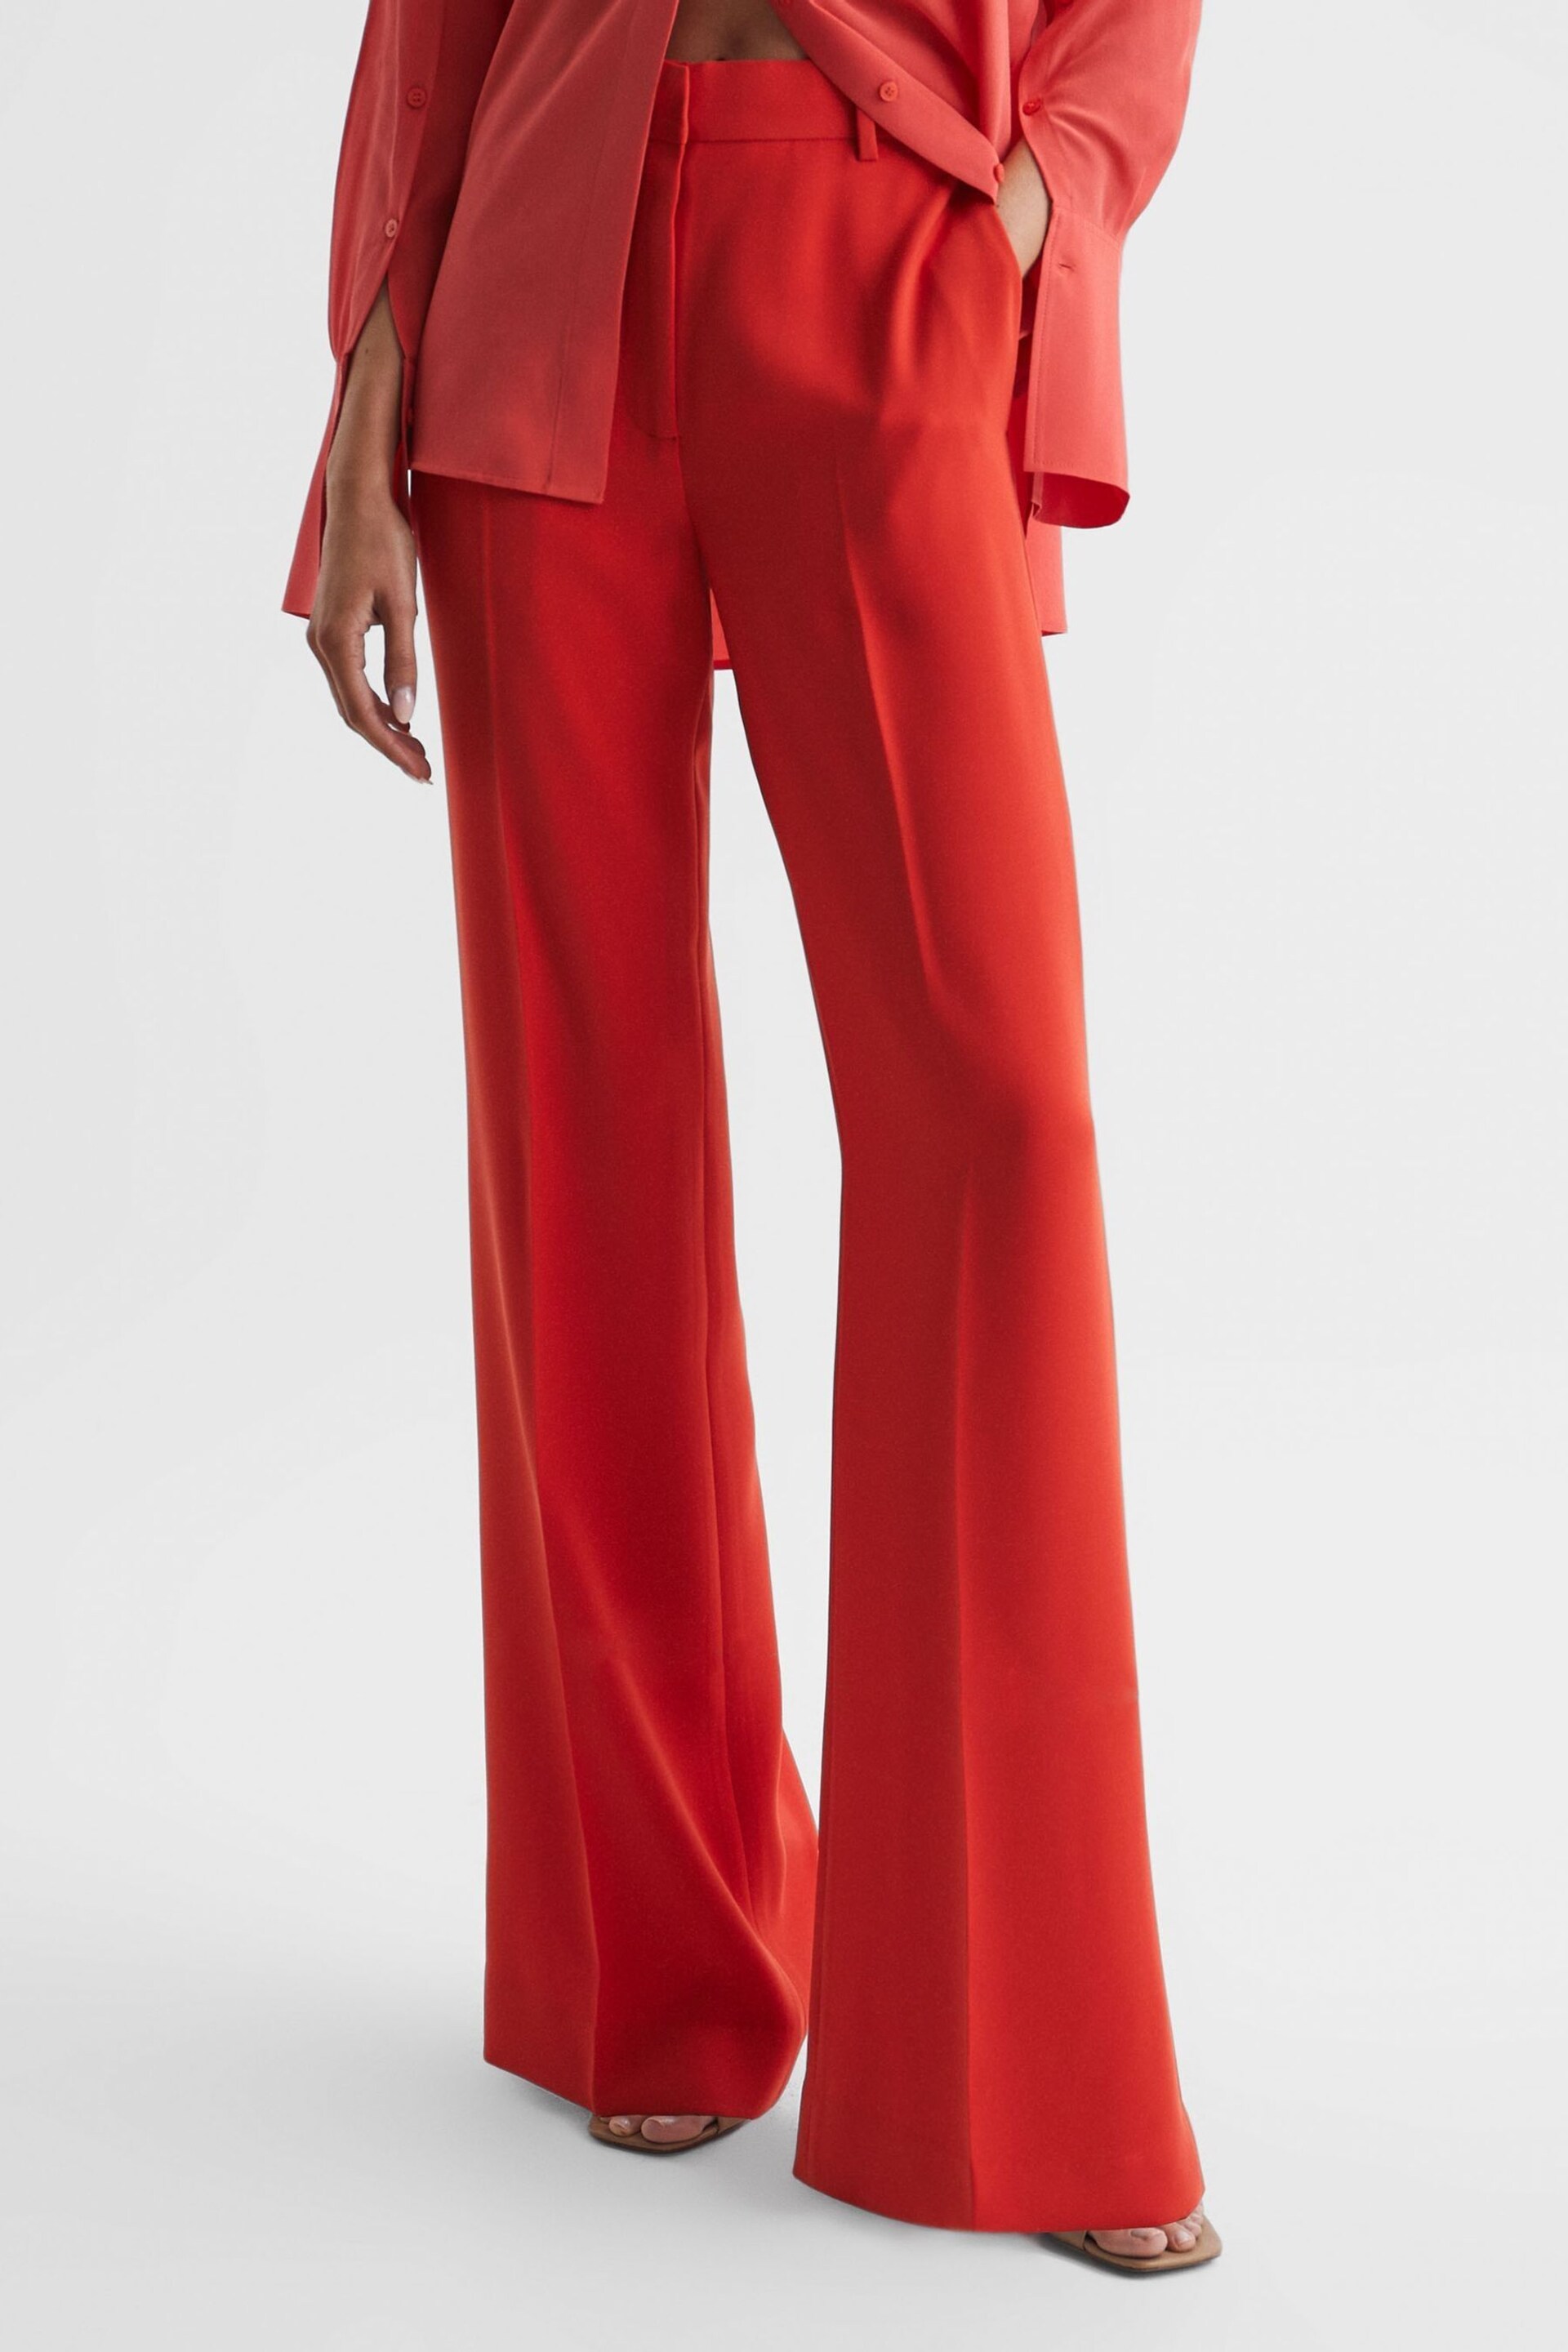 Reiss Coral Maia Wide Leg Trousers - Image 1 of 6